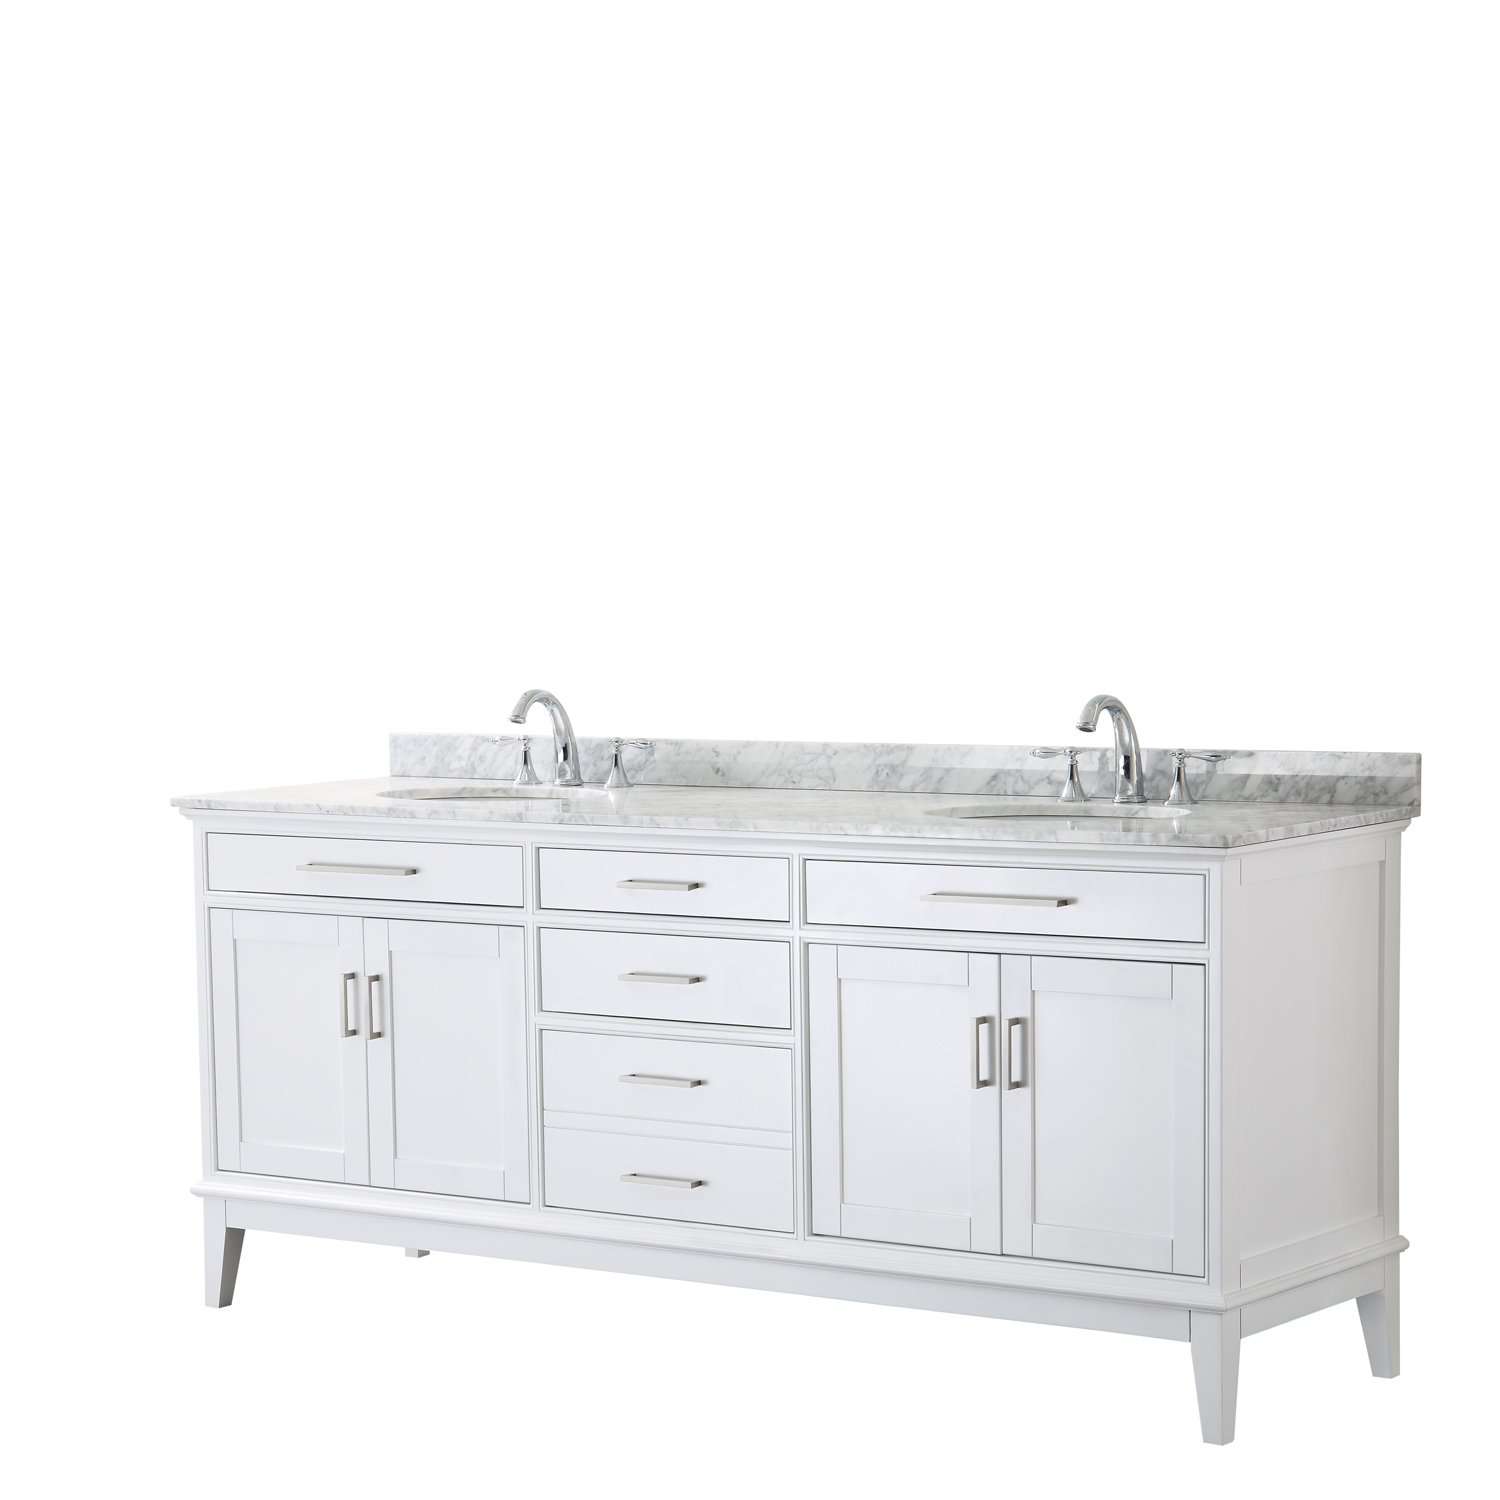 Contemporary 80" Double Bathroom Vanity in White, White Carrara Marble Countertop with Undermount Sinks, and Mirror Options